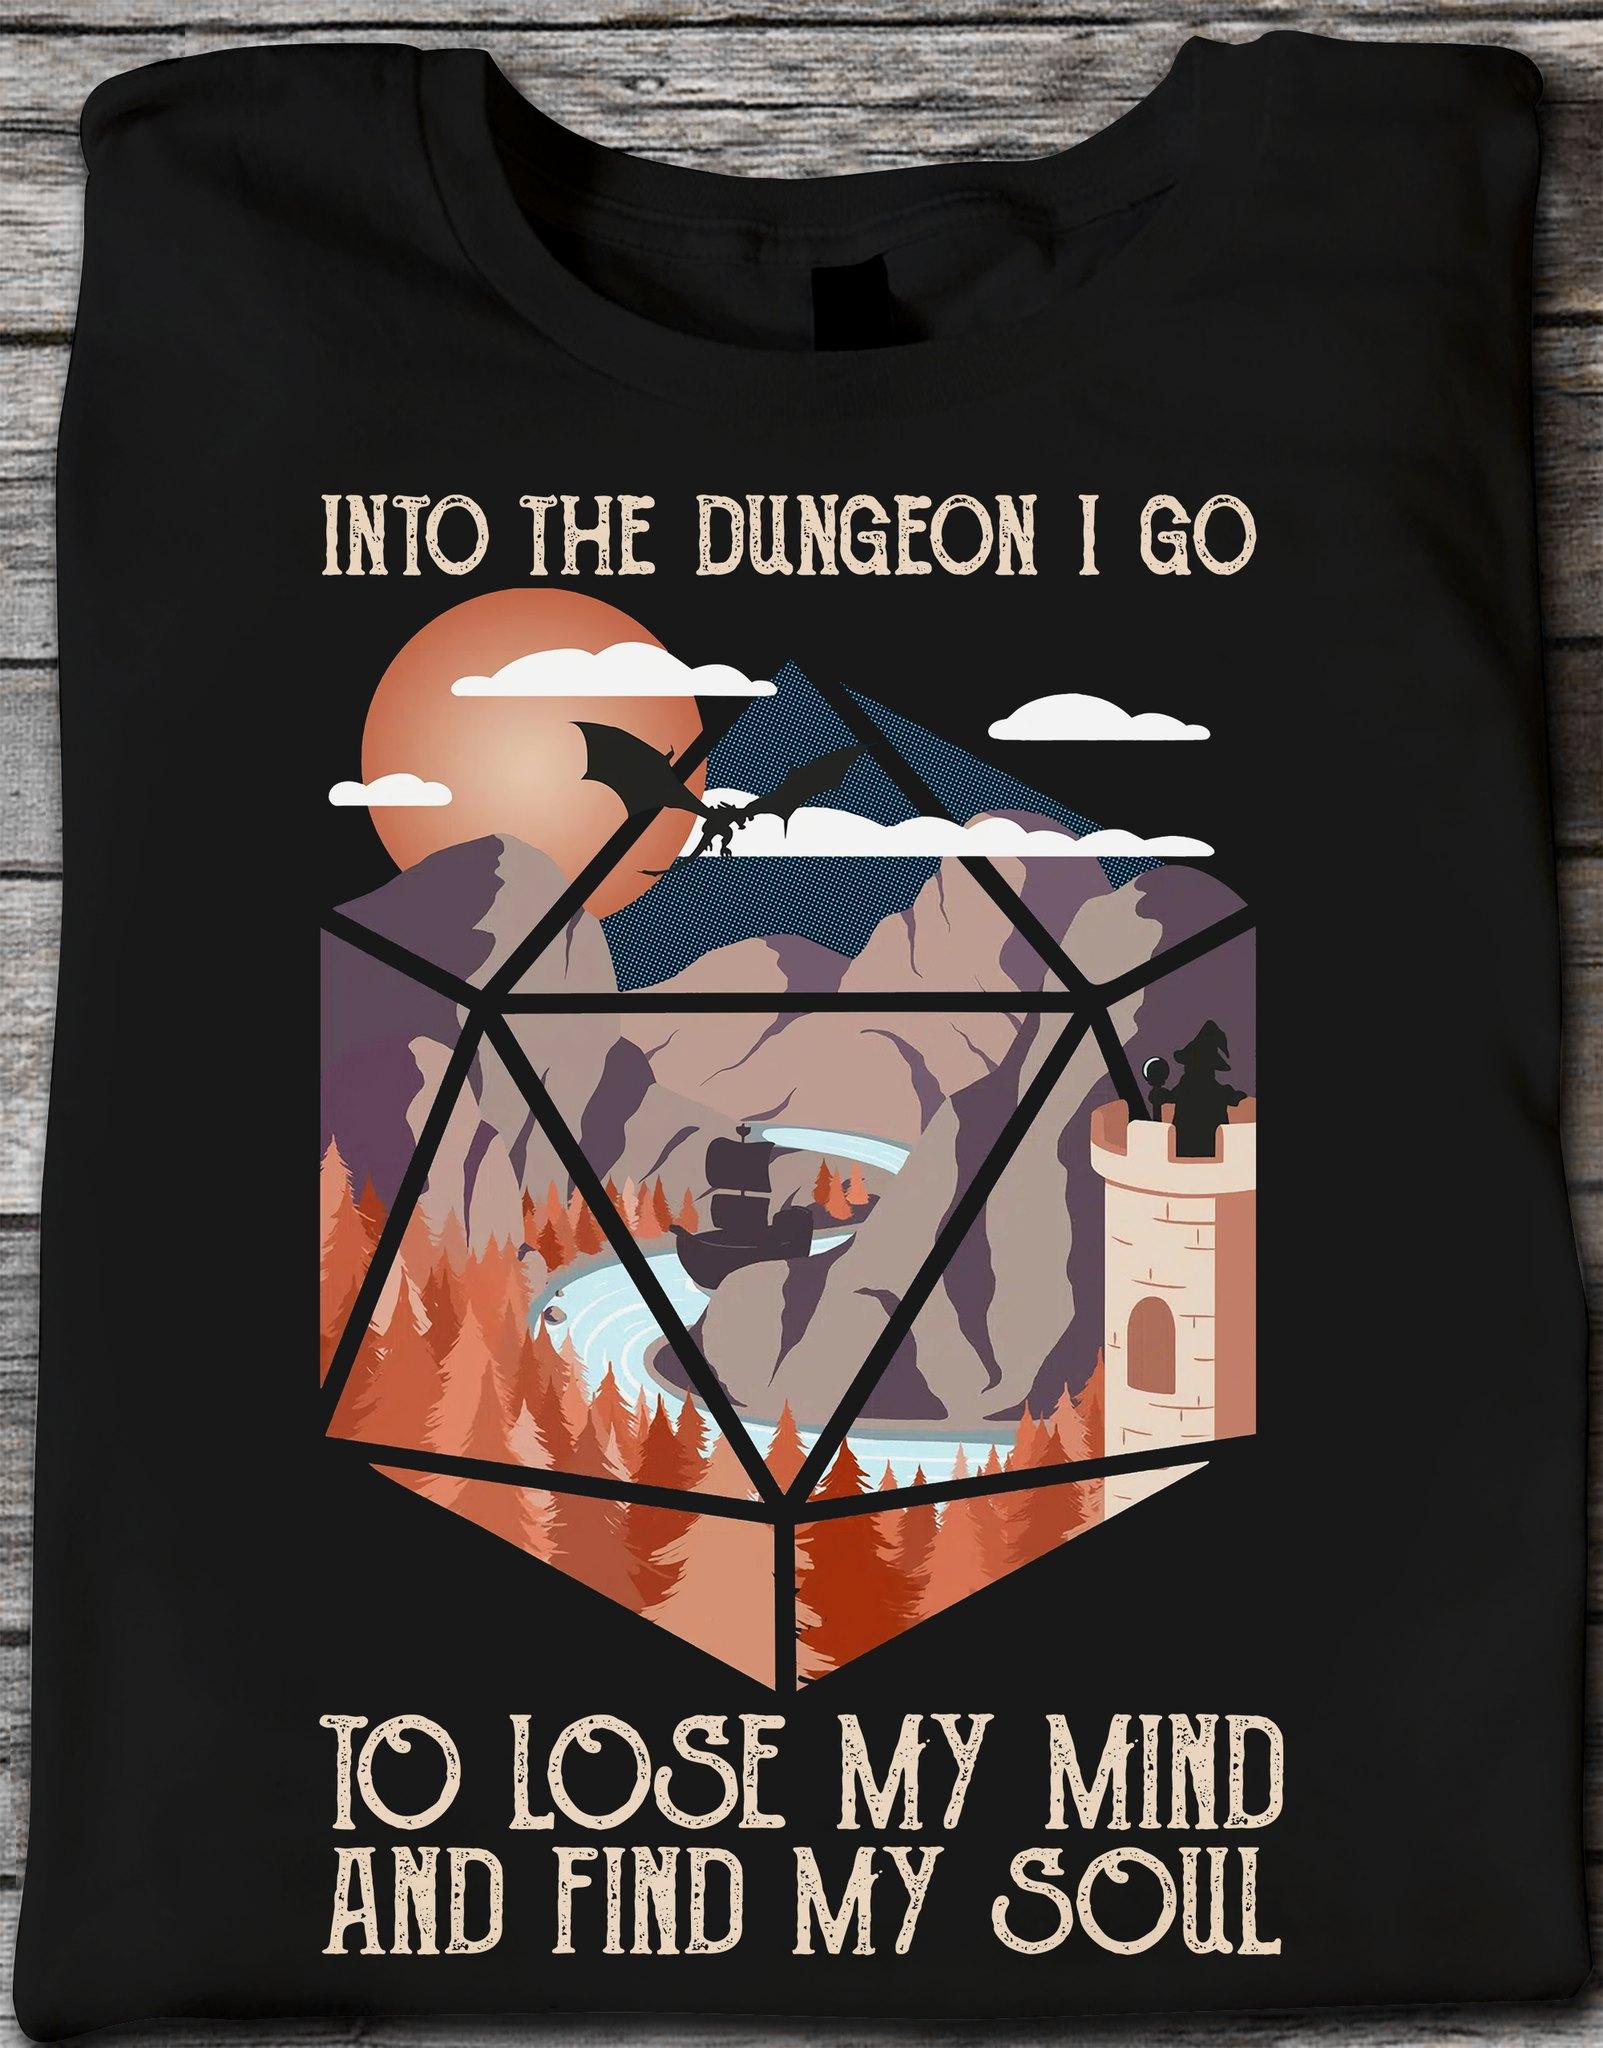 Into the dungeon I go to lose my mind and find my soul - Dungeons and Dragons, DnD dices